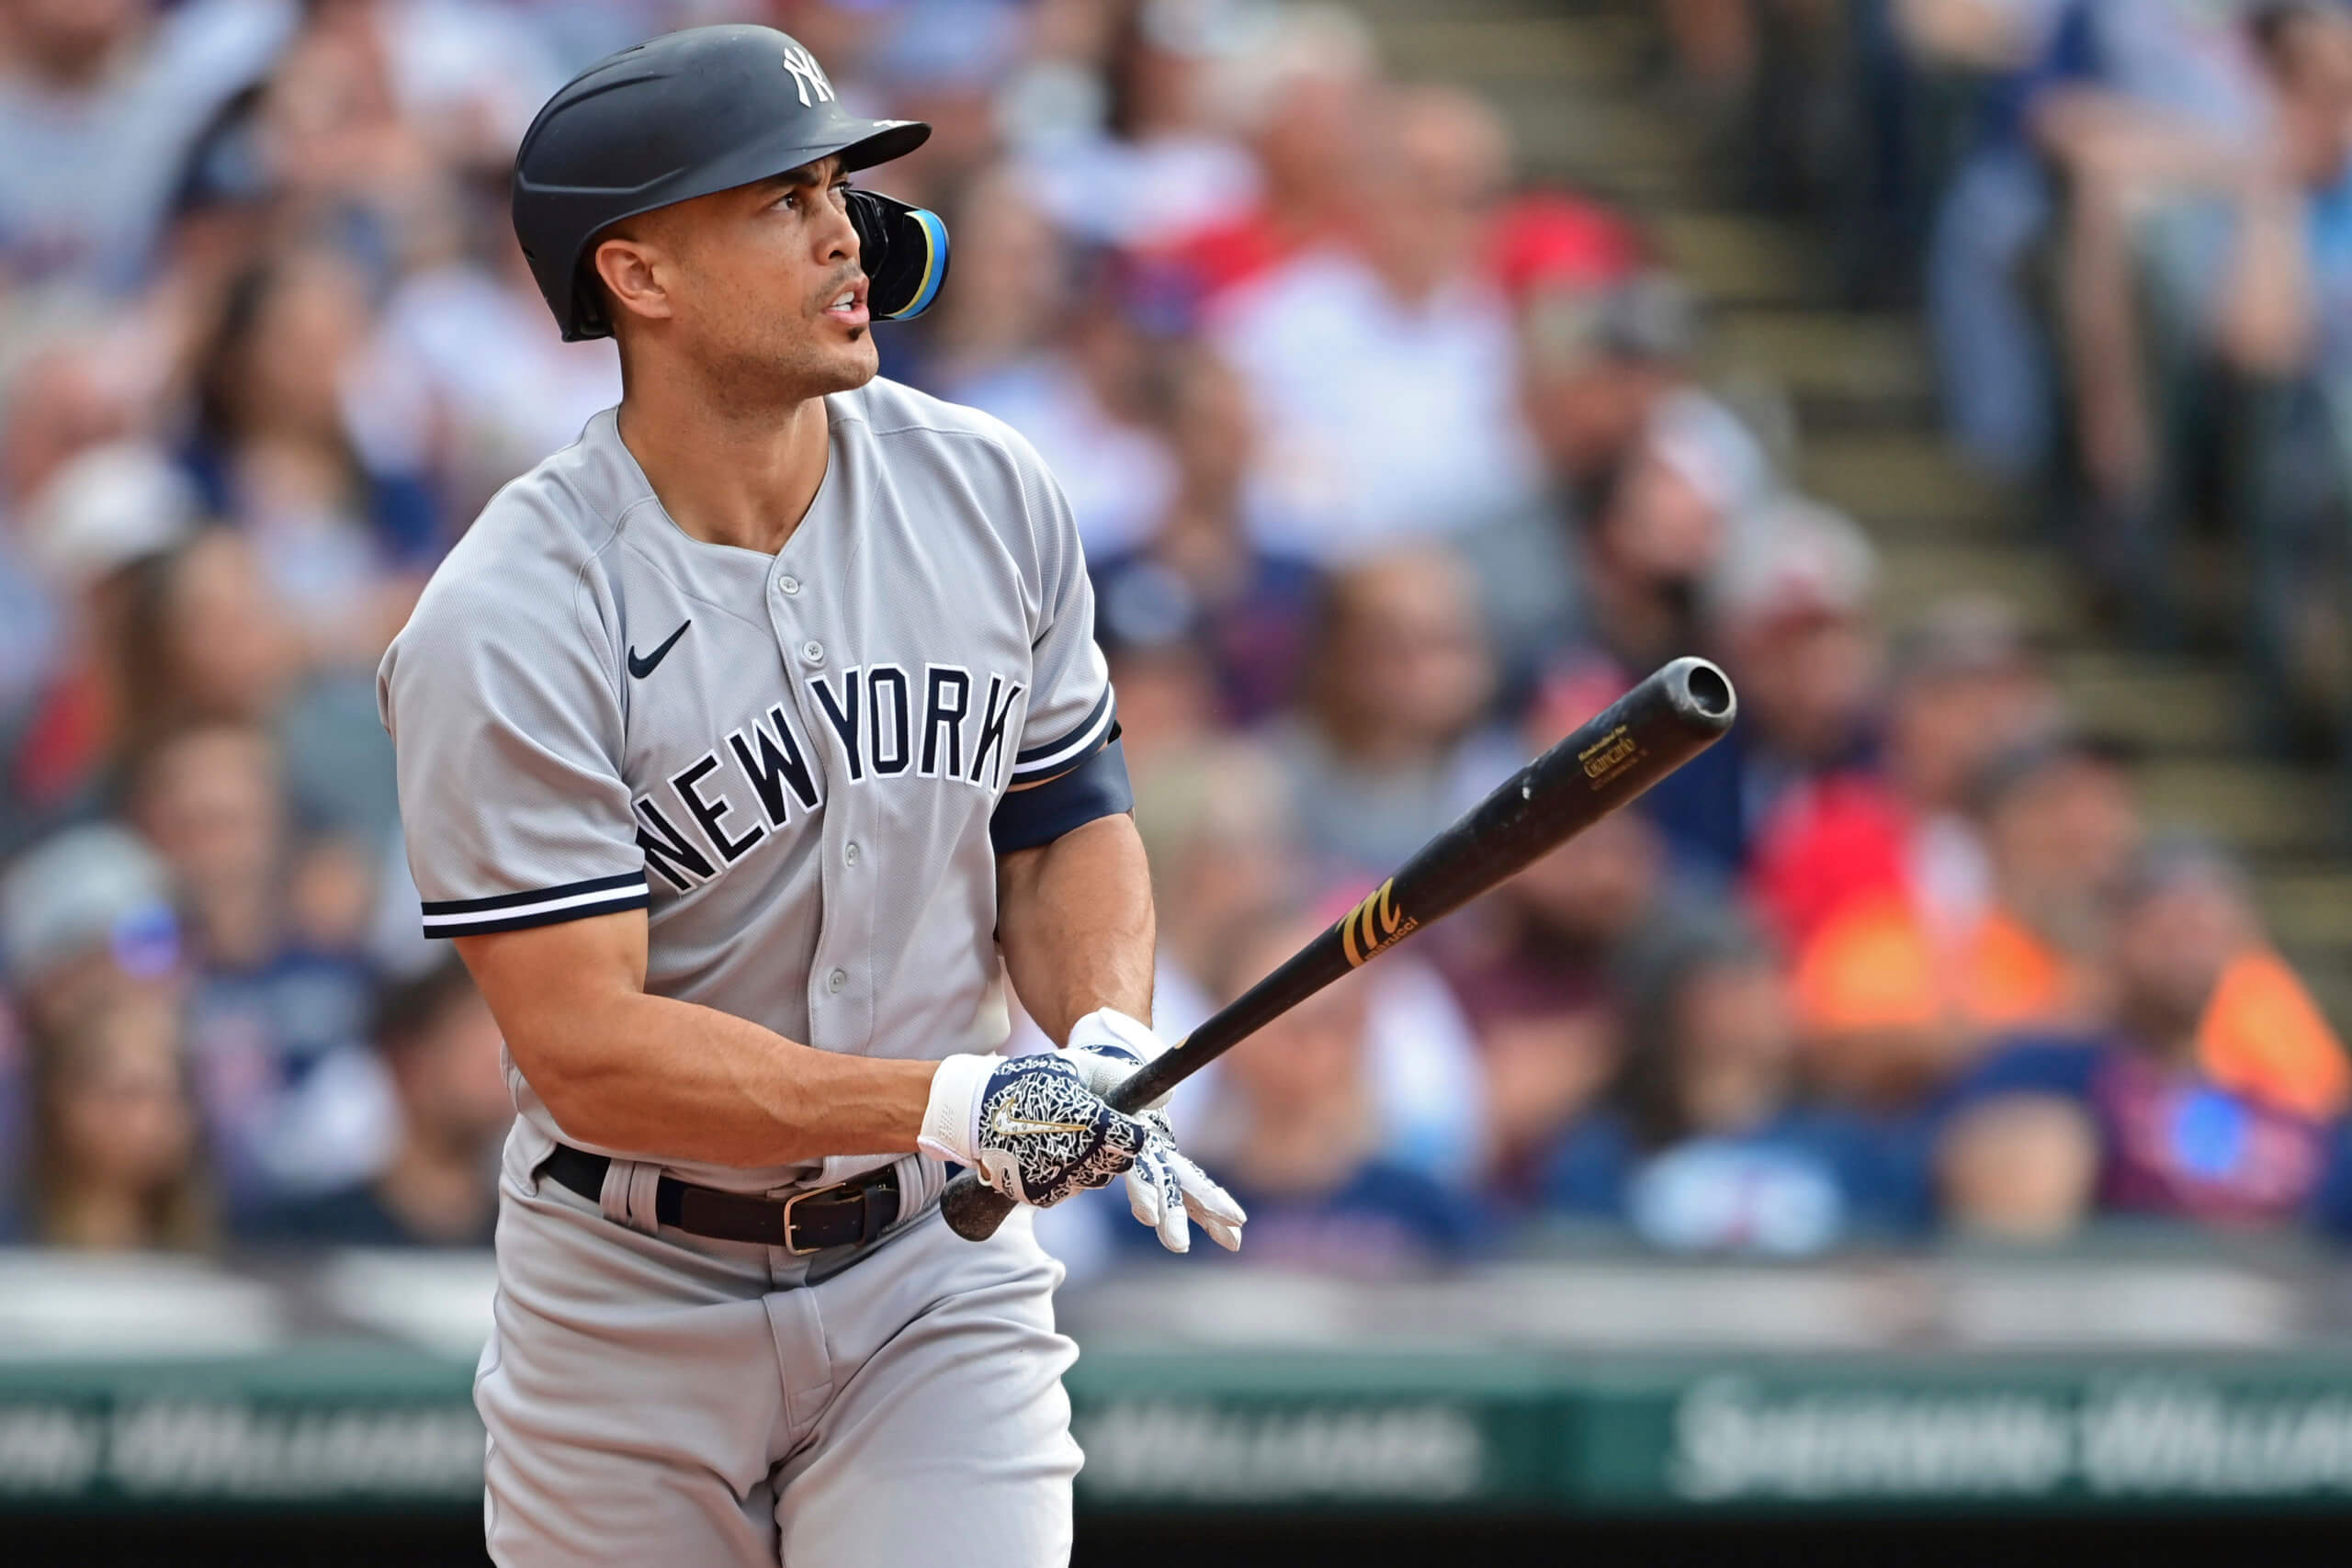 The best way for the Yankees to replace Giancarlo Stanton